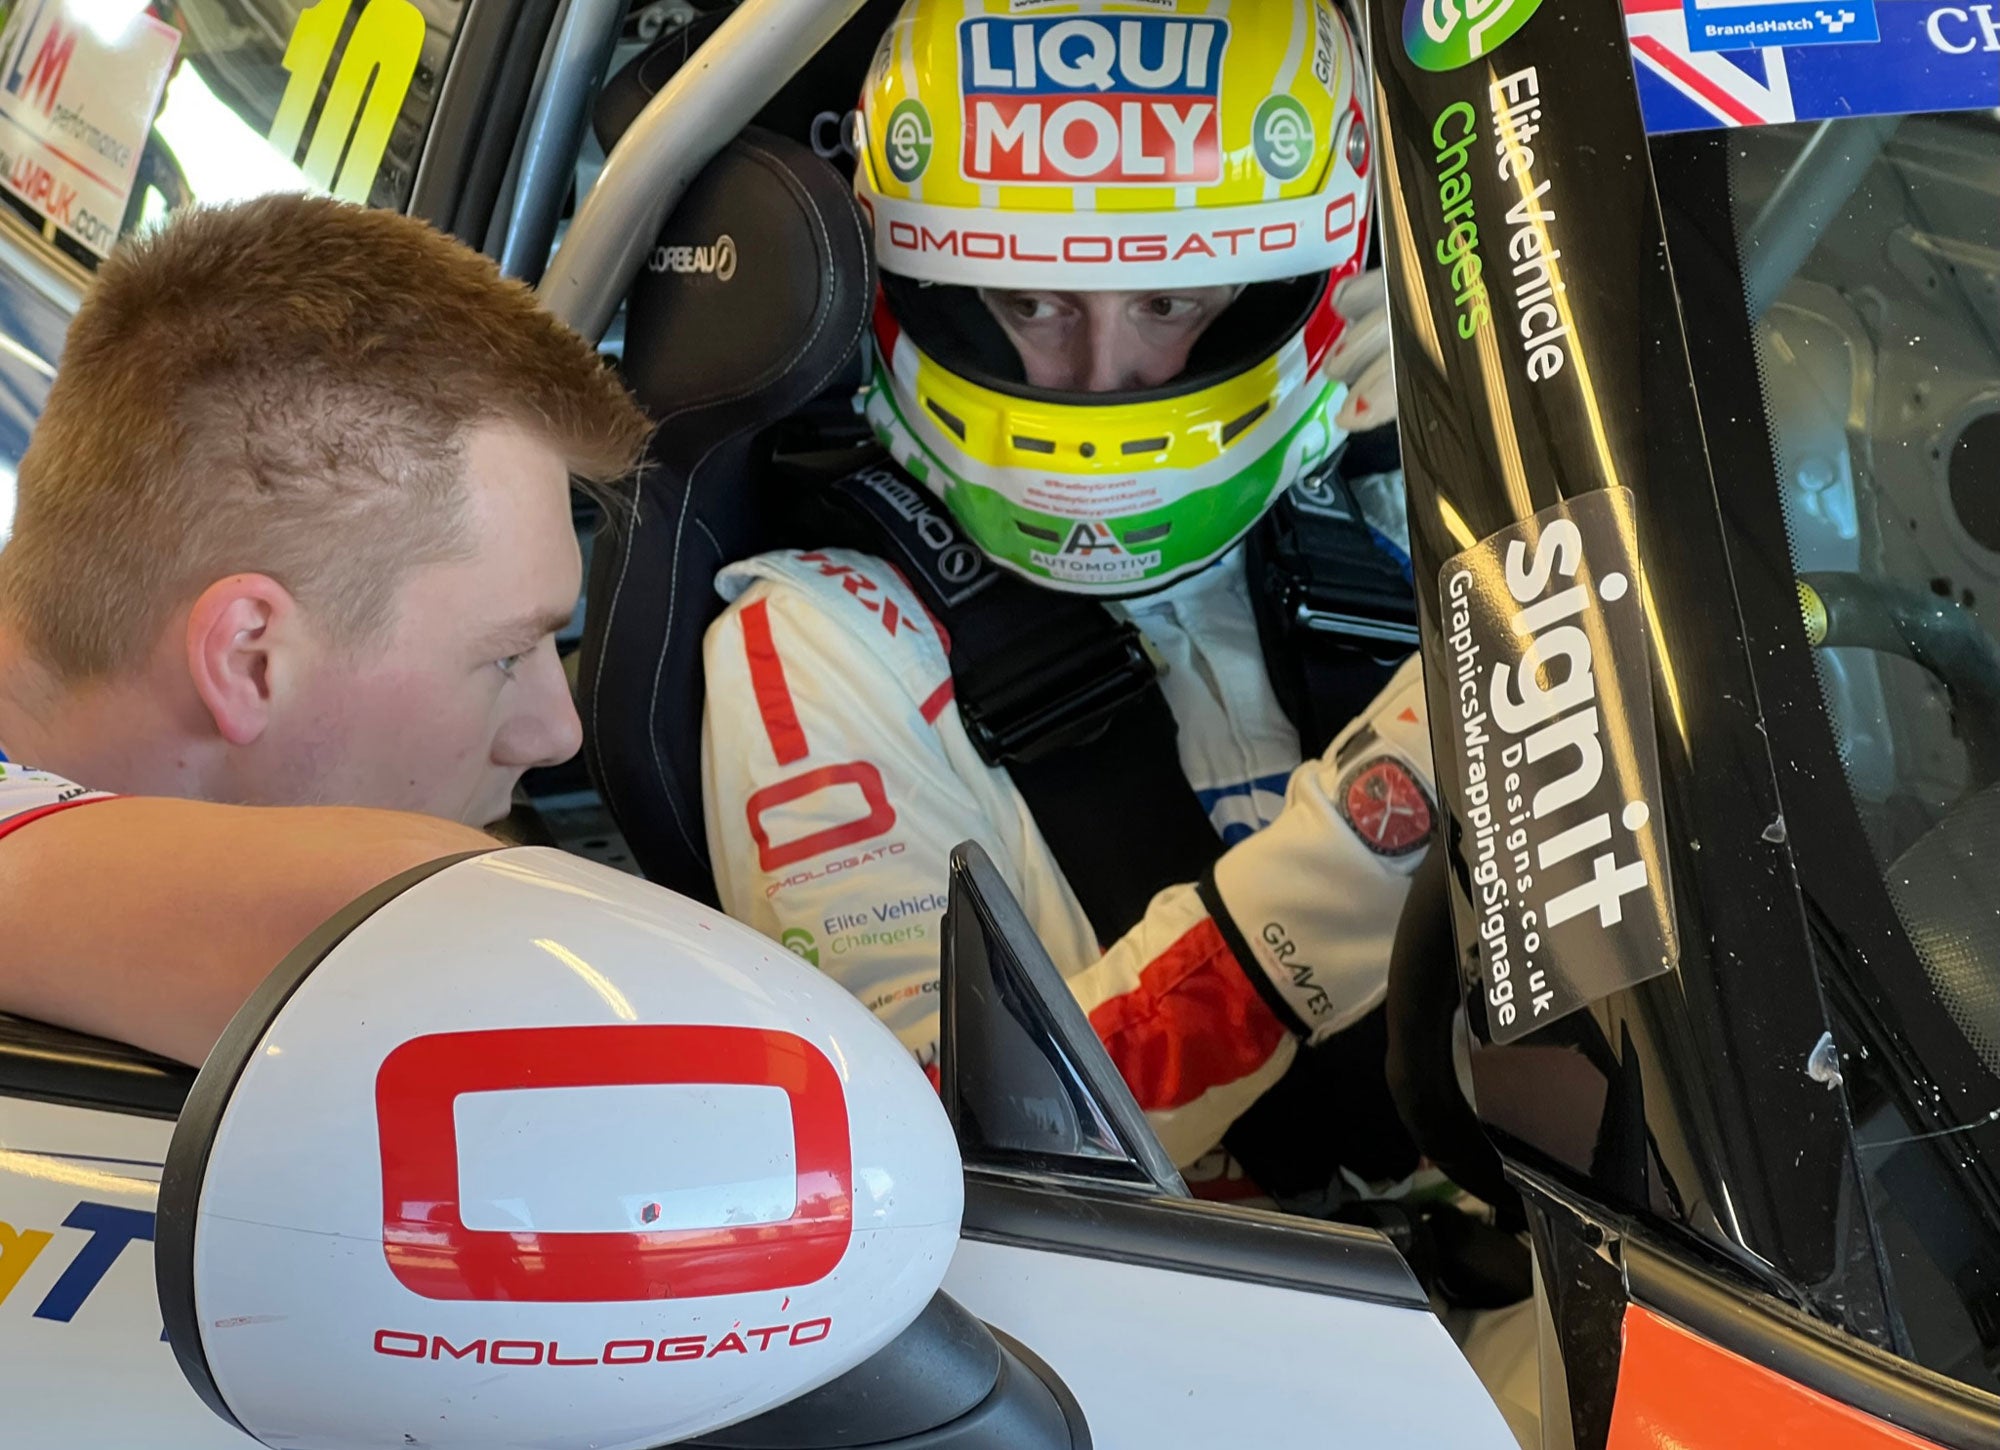 Bradley Gravett son of BTCC British Touring Car Champion Robb Gravett in the MINI Challenge JCW Series at Silverstone National Tyre Test in 2022 Talking to Lewis Perry Graves Motorsport Cooper Racing Driver LIQUI MOLY LM Performance